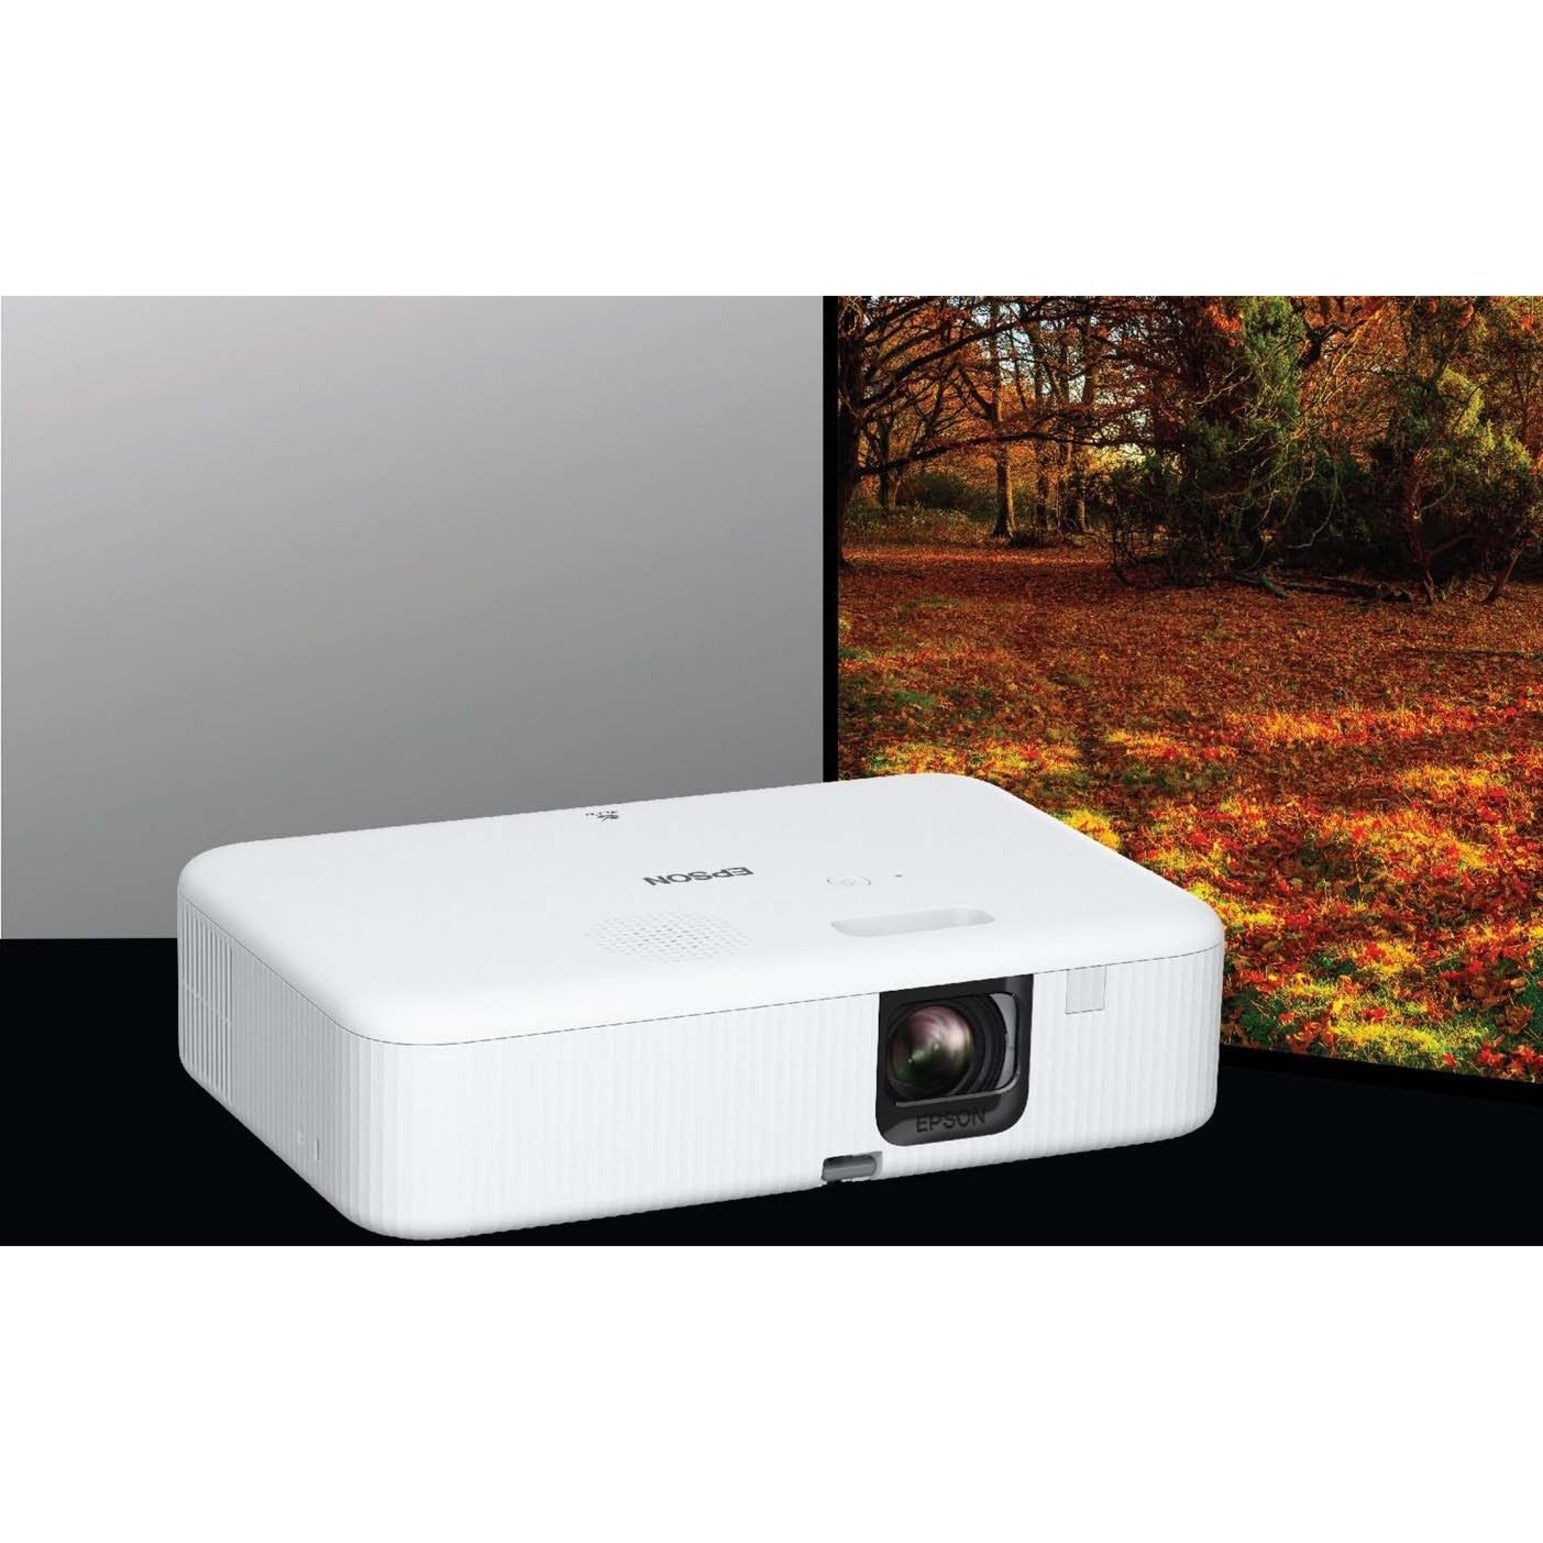 Epson V11HA85020 EpiqVision Flex CO-FH02 Full HD 1080p Smart Portable Projector, 3-Chip 3LCD, Android TV, Bluetooth